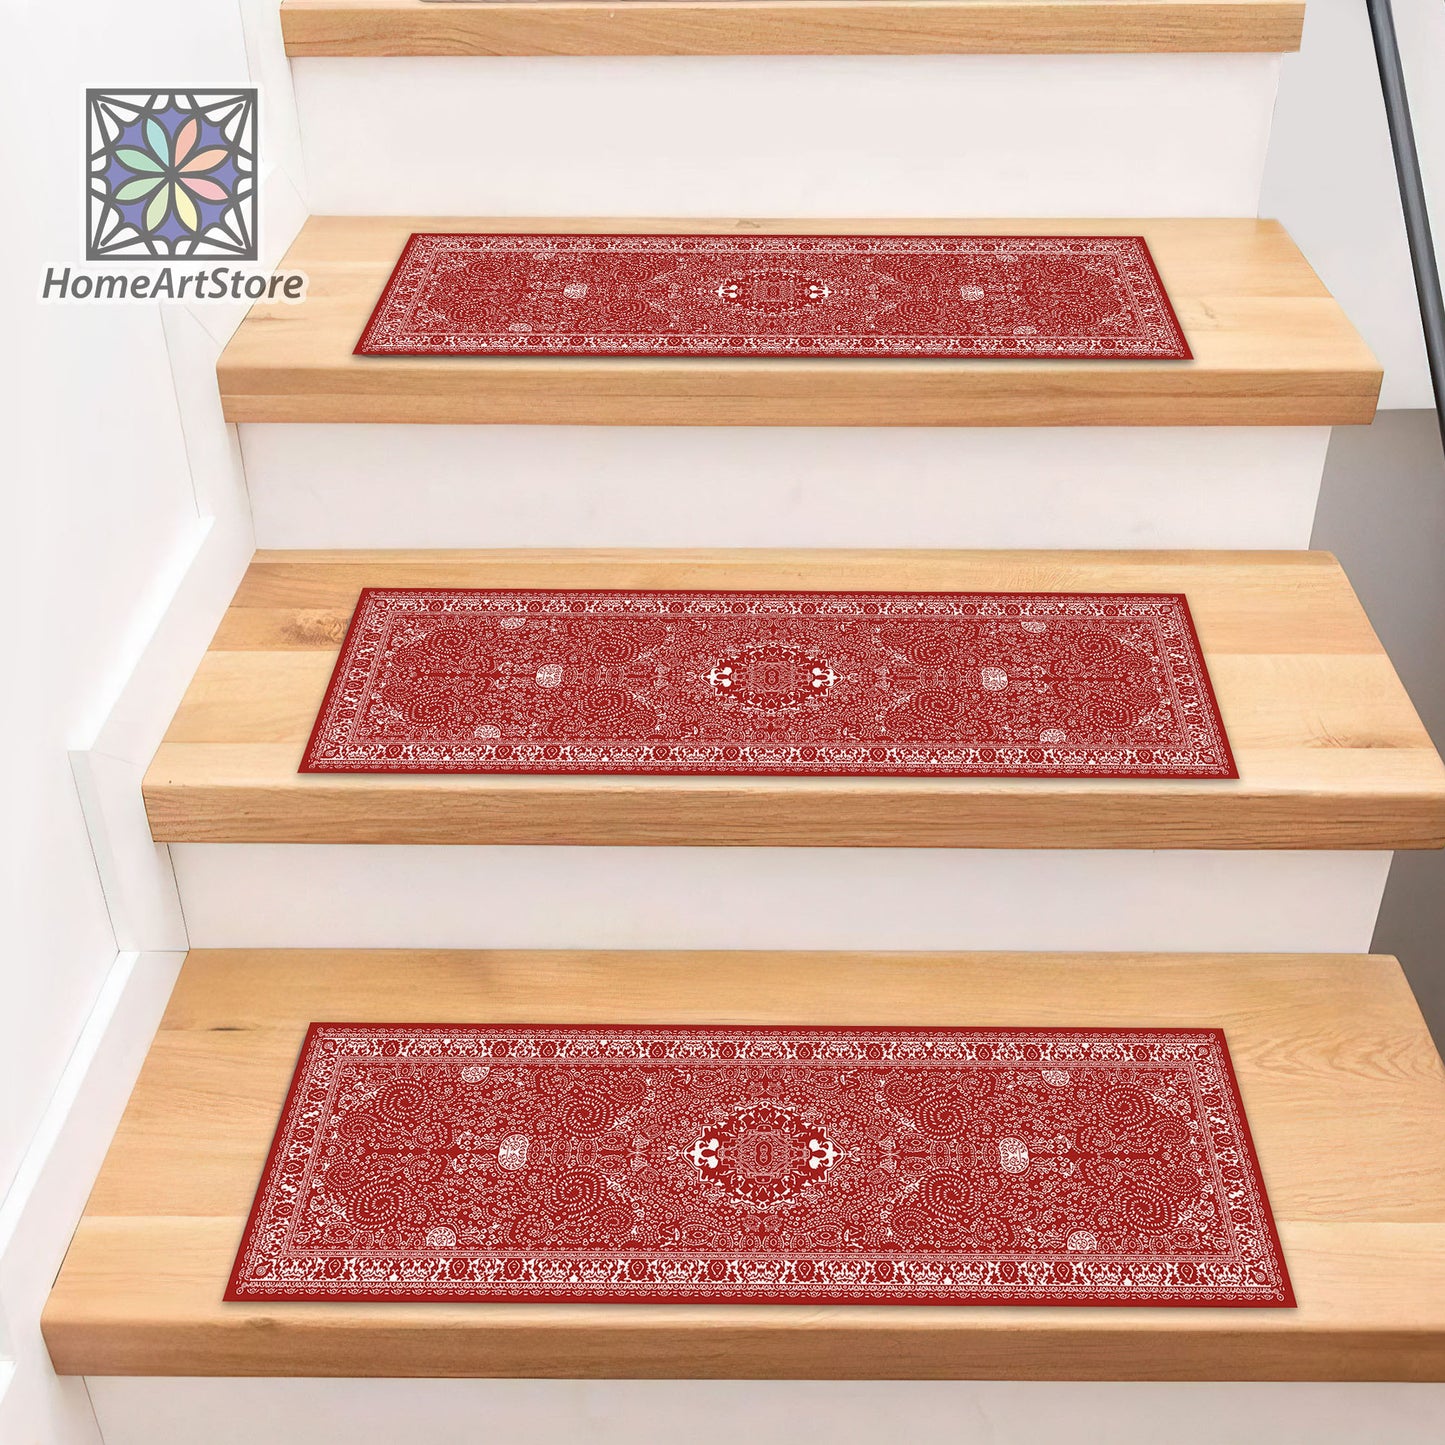 Scandinavian Stair Rugs, Red and White Boho Style Stair Mats, Modern Stair Tread Carpet, Nonslip Backing Cool Stair Step Rugs